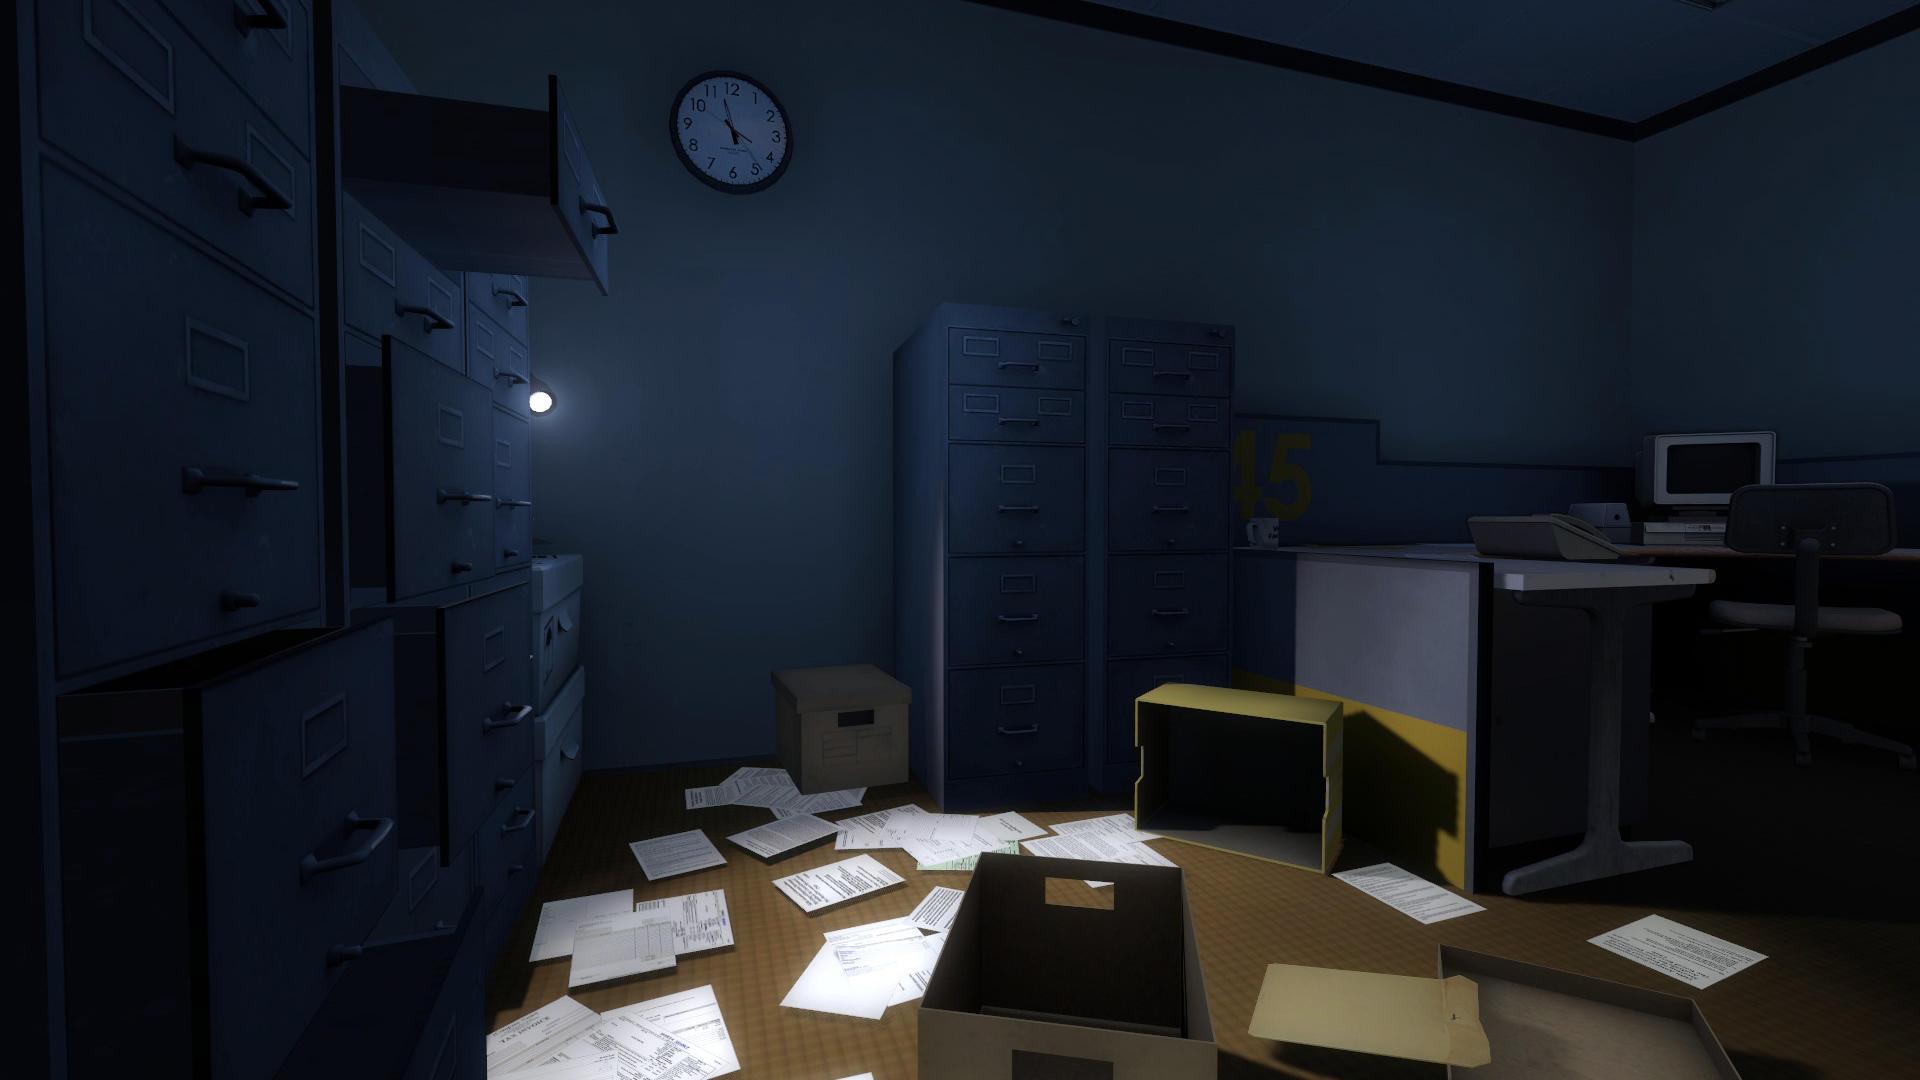 The Stanley Parable screenshot game